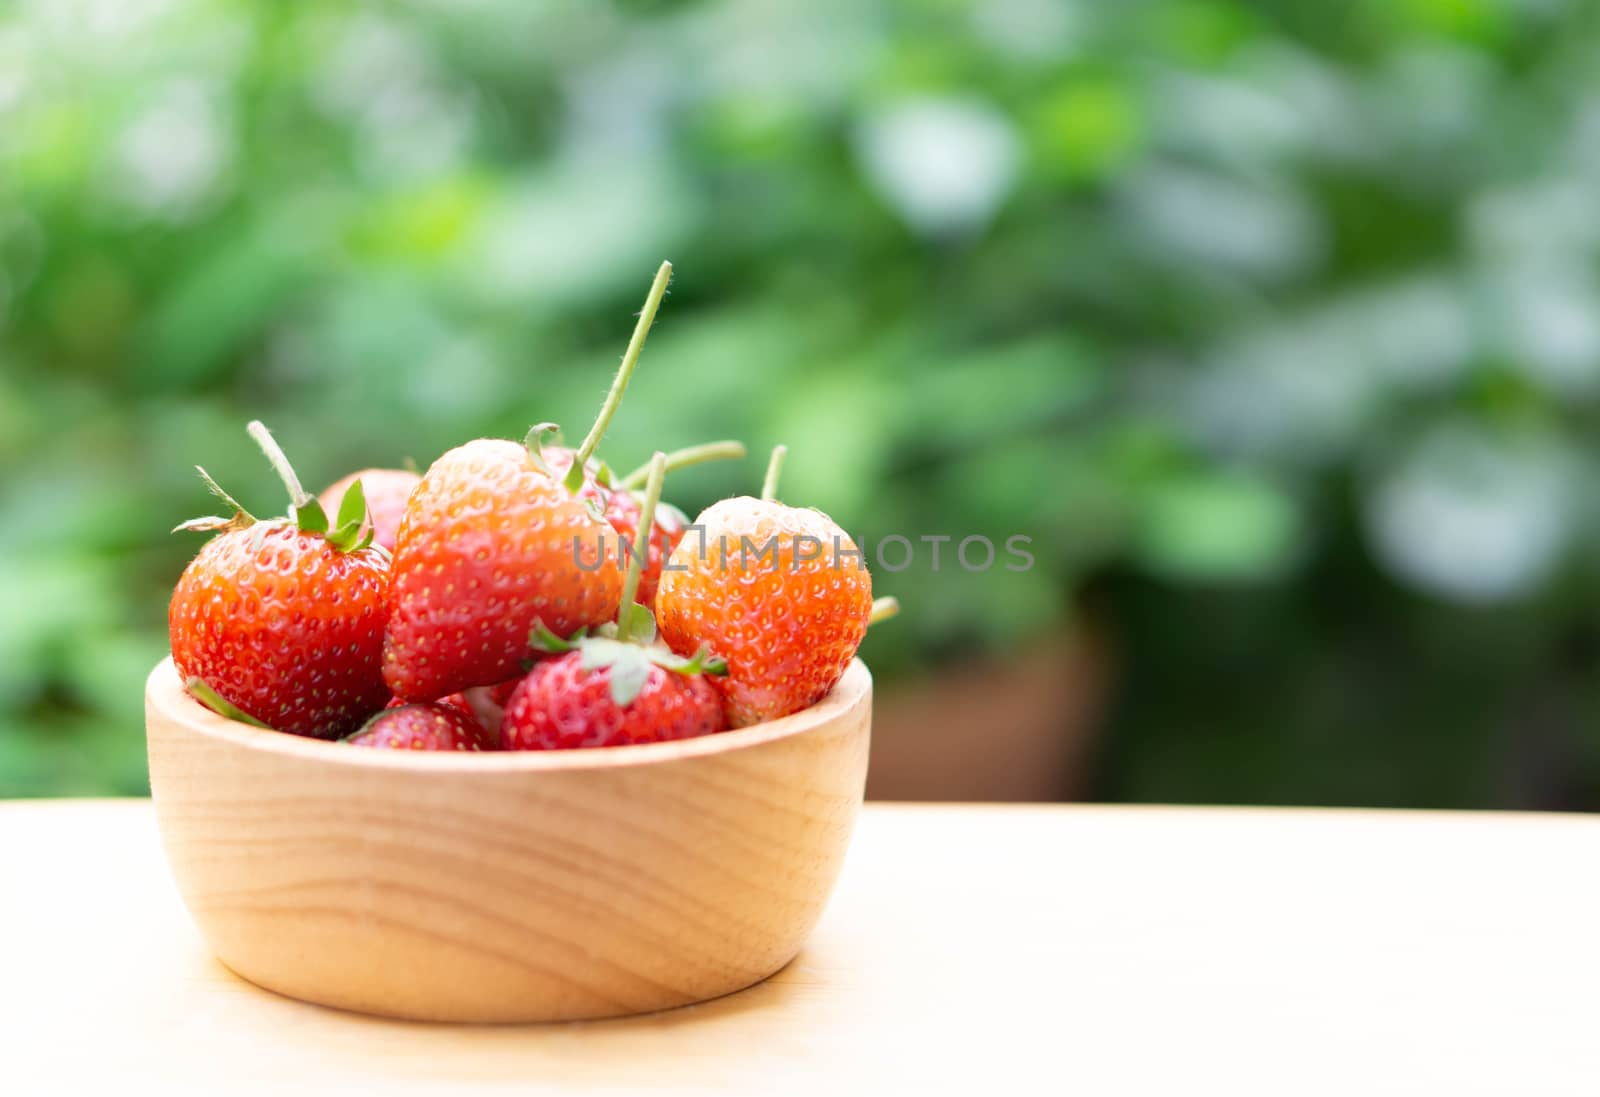 Closeup red strawberry in wood bowl with green nature background by pt.pongsak@gmail.com